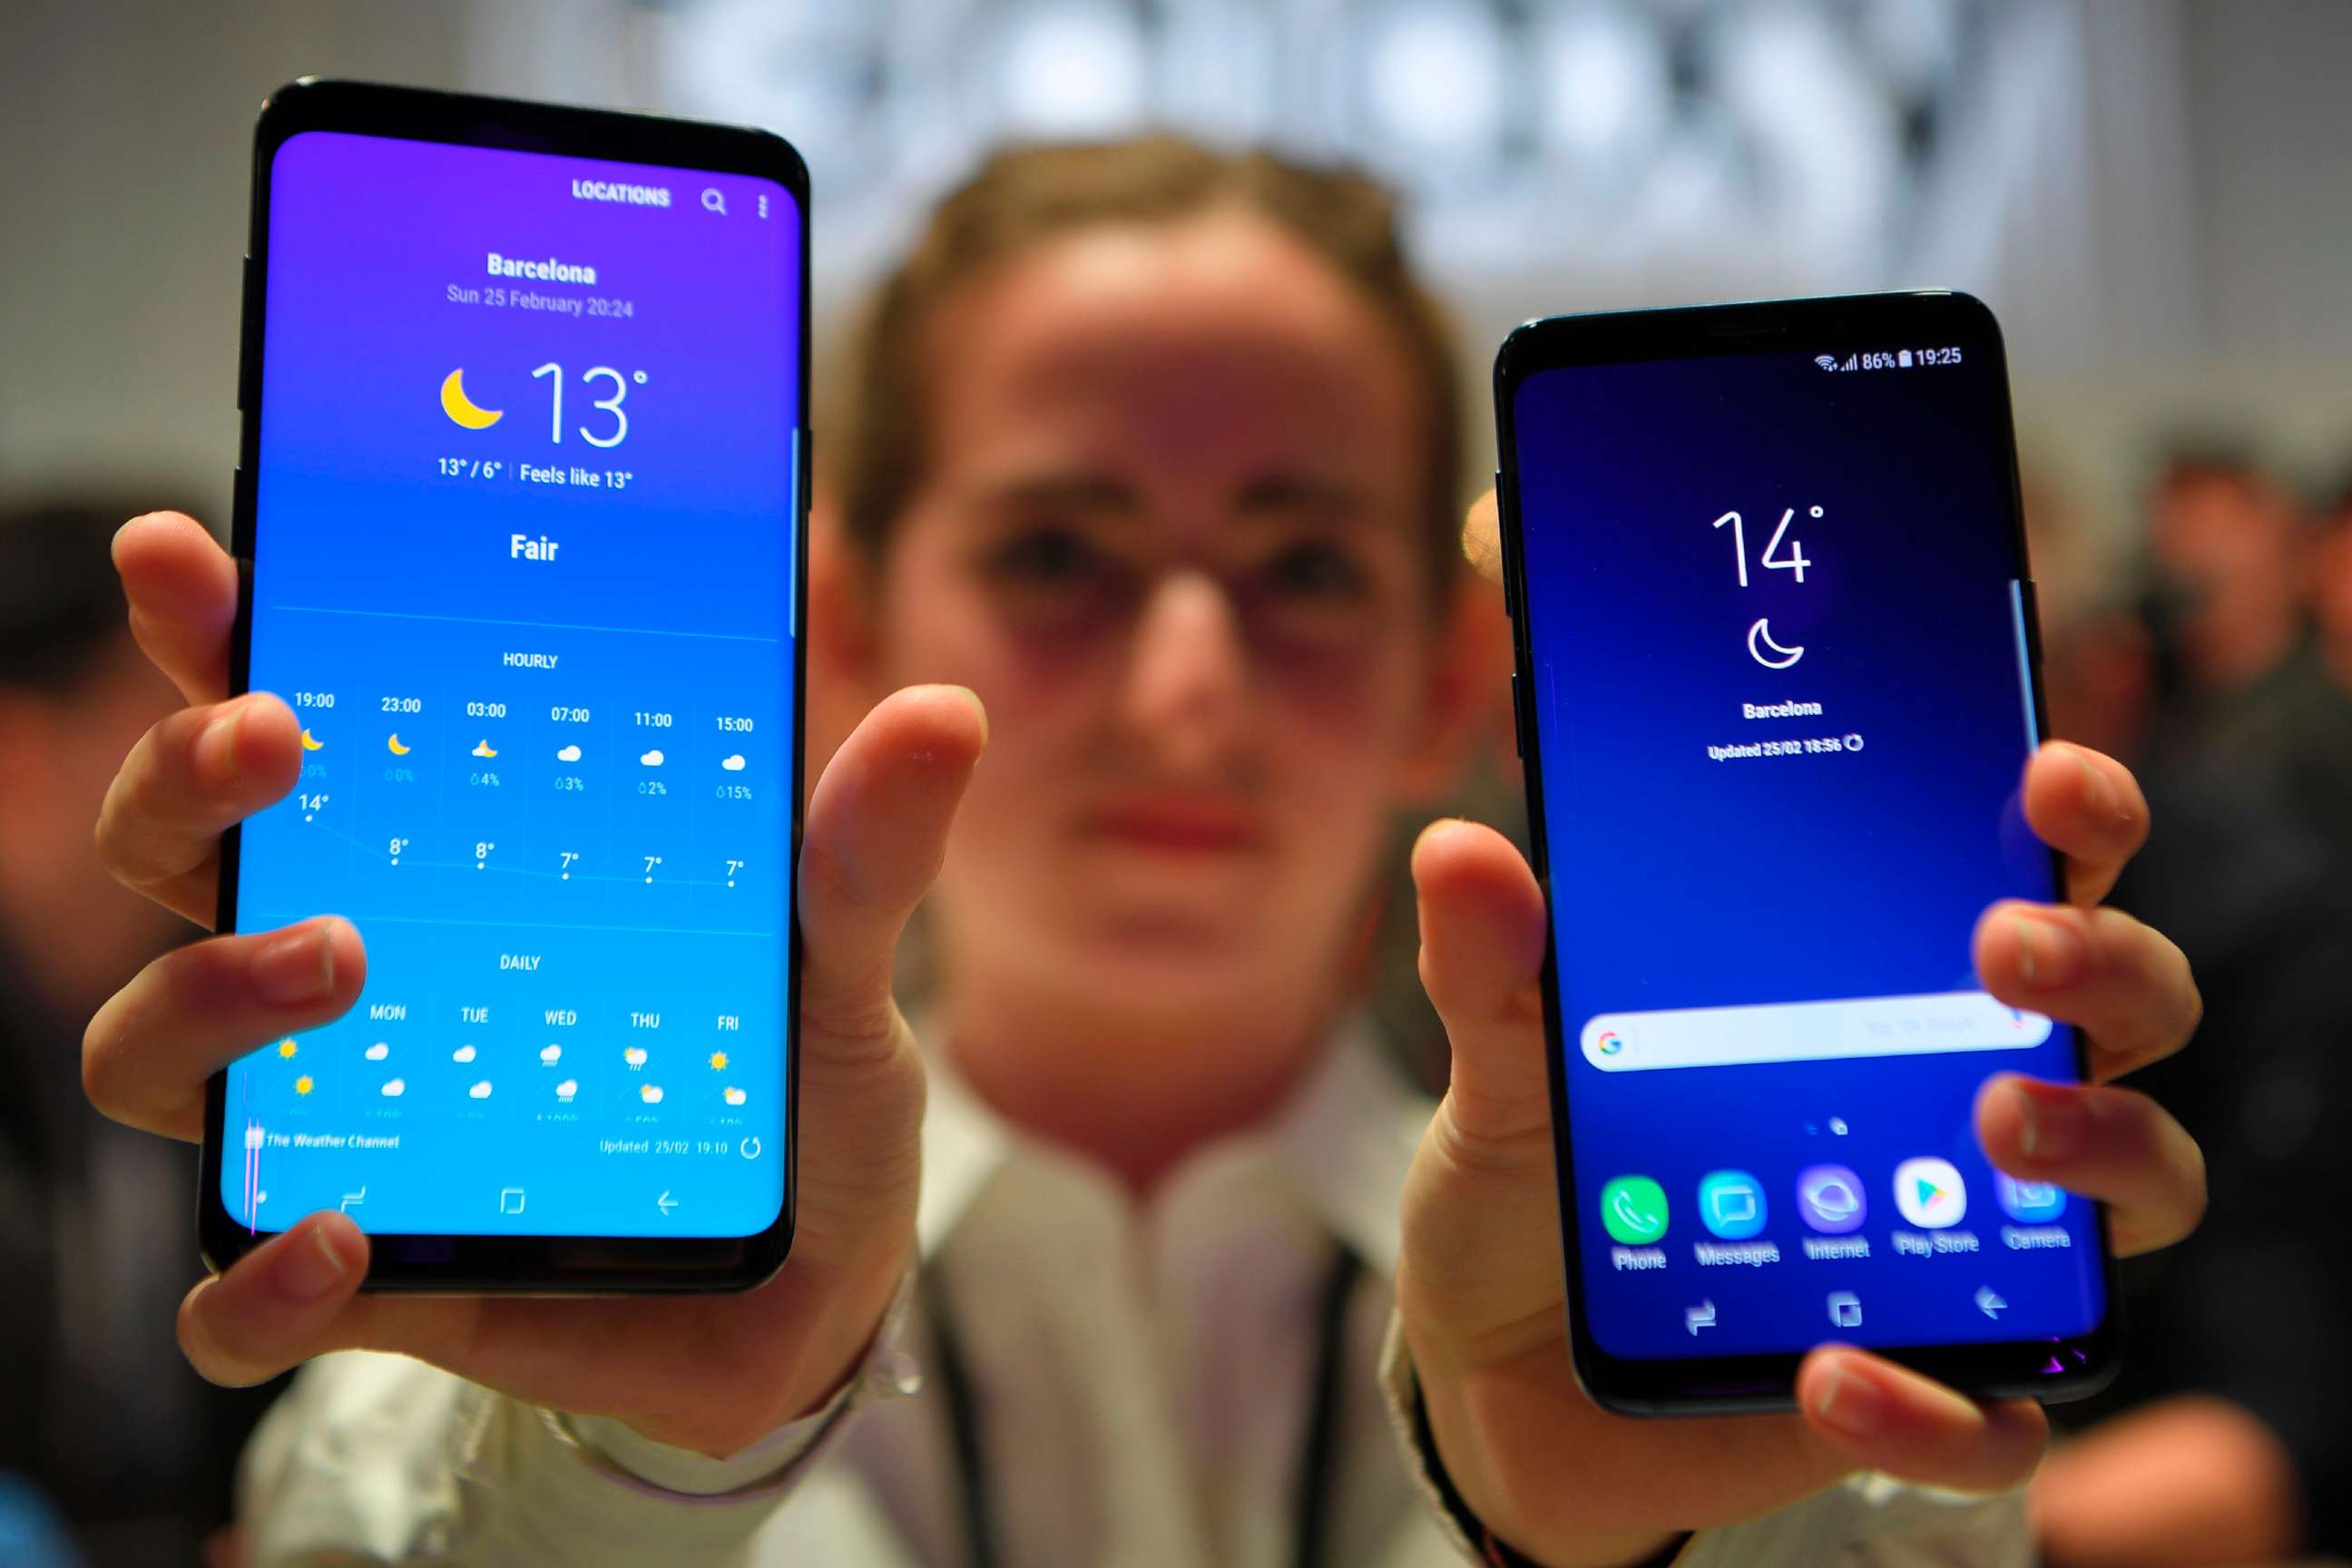 PHOTO: A hostess holds two new Samsung Galaxy S9 mobile phones during the Samsung Galaxy S9 Unpacked event on Feb. 25, 2018 in Barcelona.